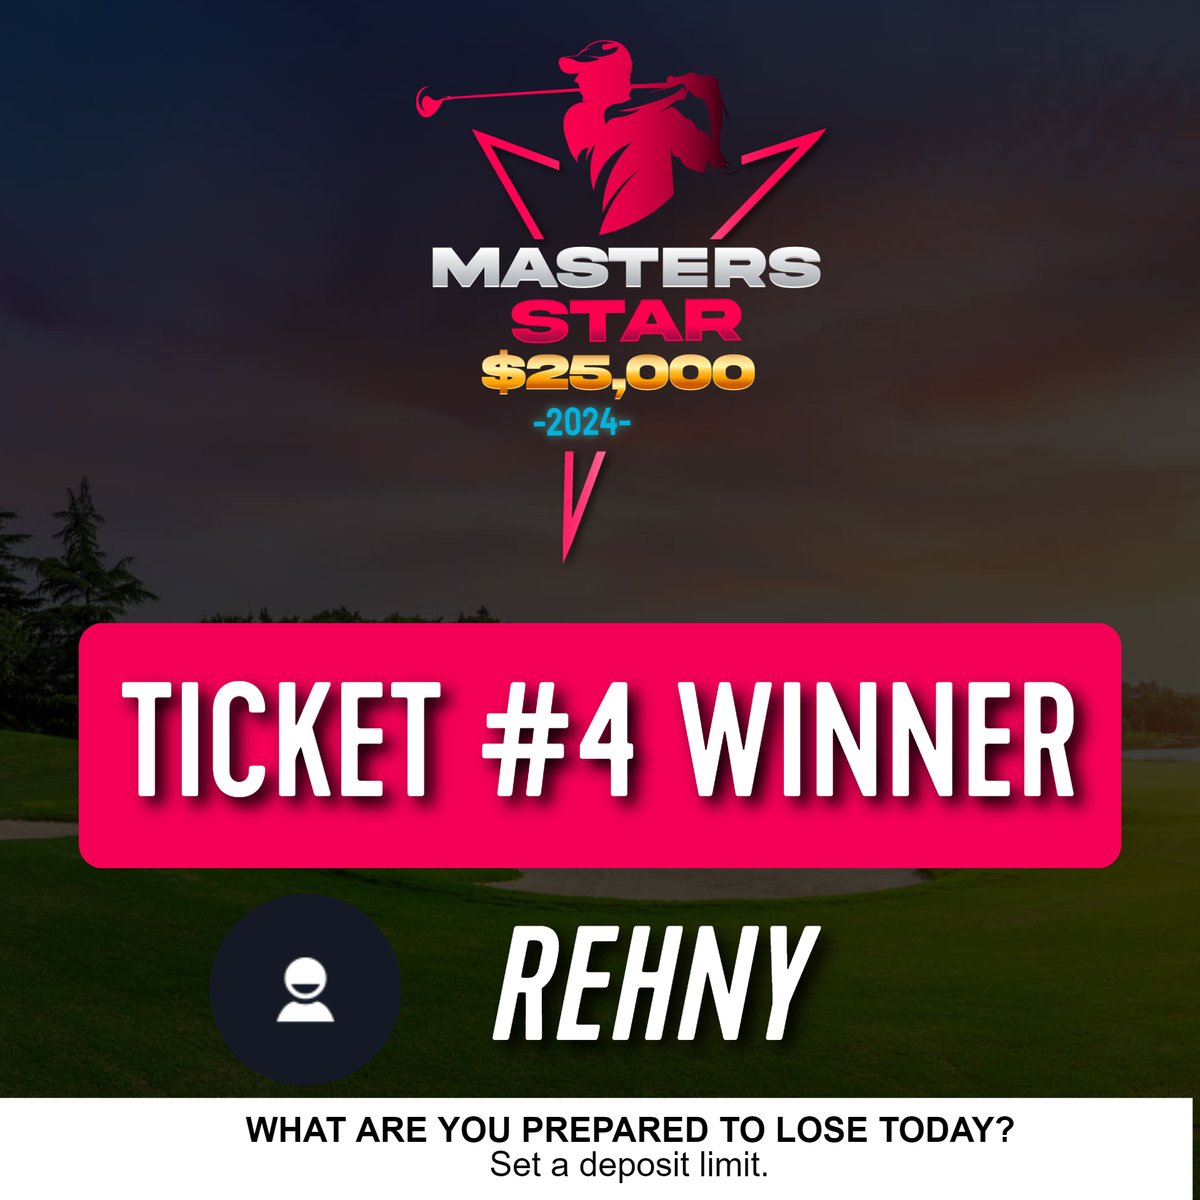 After all the weather issue in Phoenix, we have a winner for the 4th ticket for the #MastersStar Great work 'Rehny'! Congratulations on winning a ticket! Next chance is the Genesis, another Signature Event. MORE | bit.ly/MastersStar24